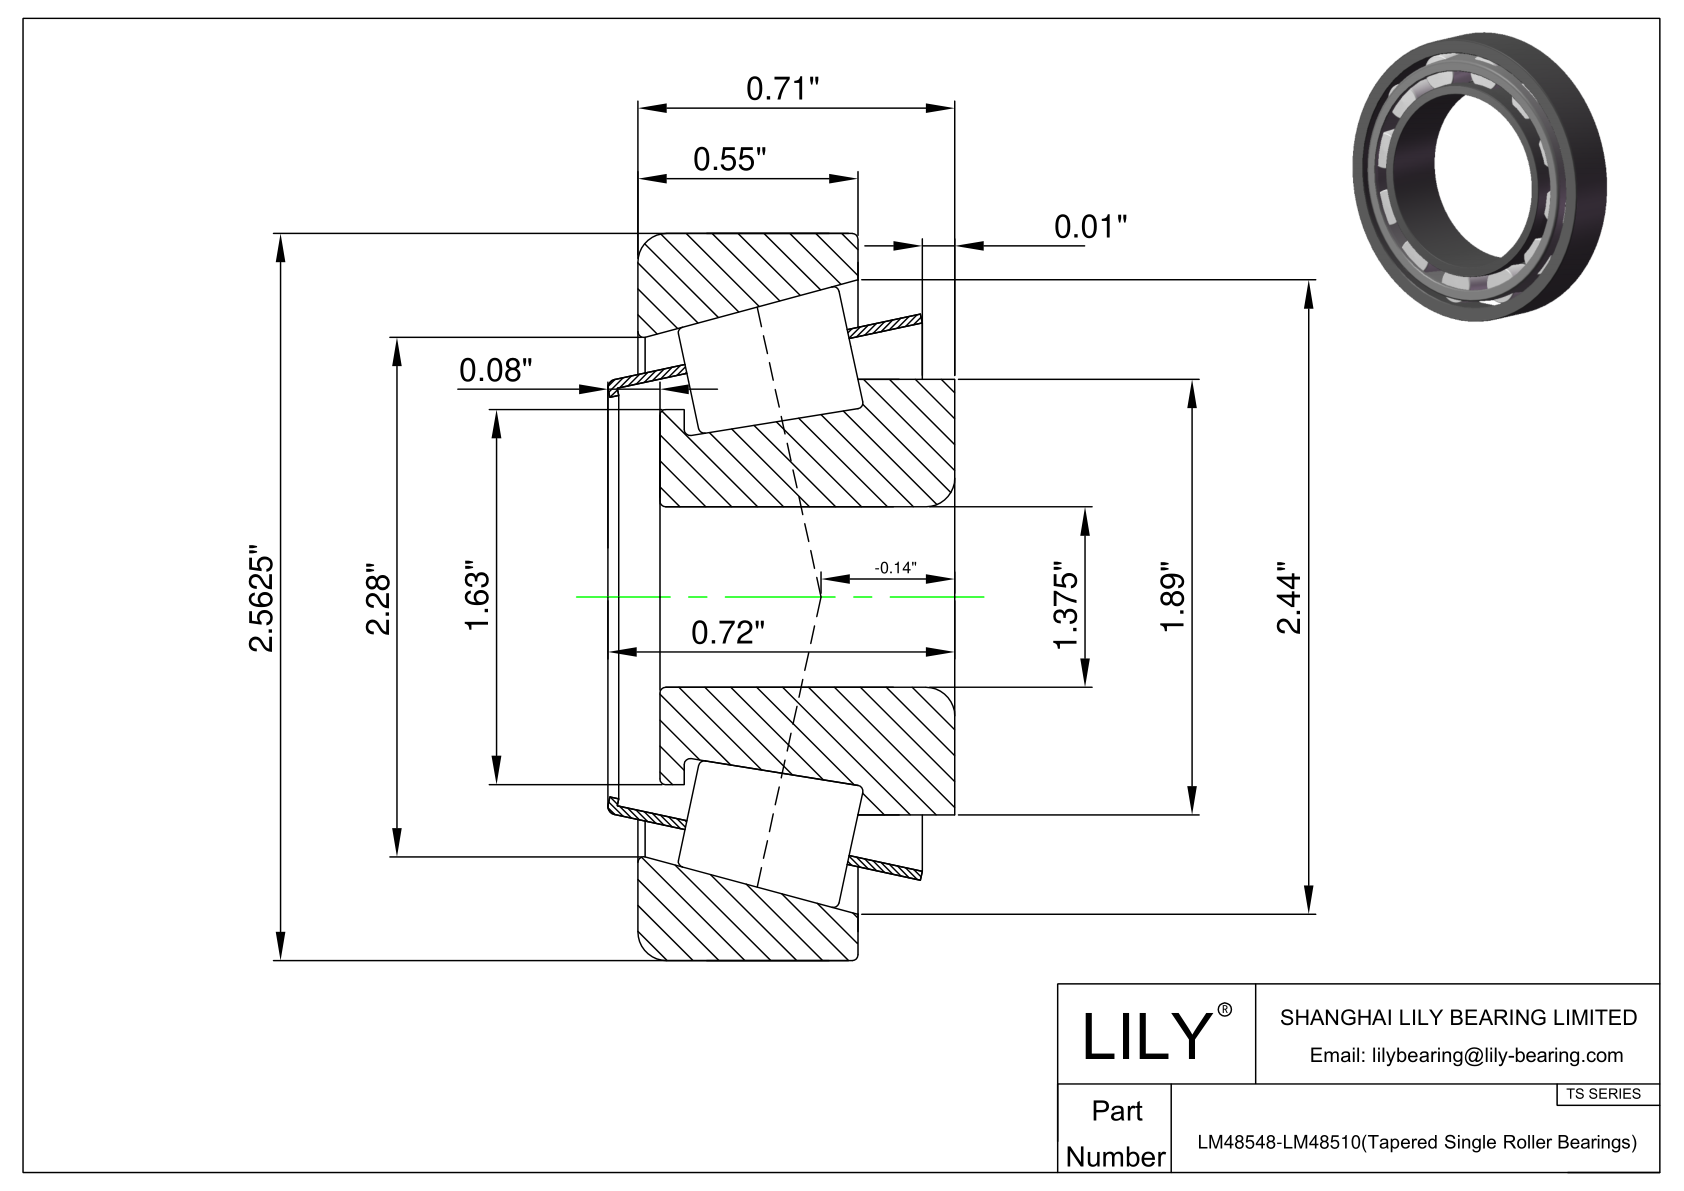 LM48548-LM48510 TS (Tapered Single Roller Bearings) (Imperial) cad drawing